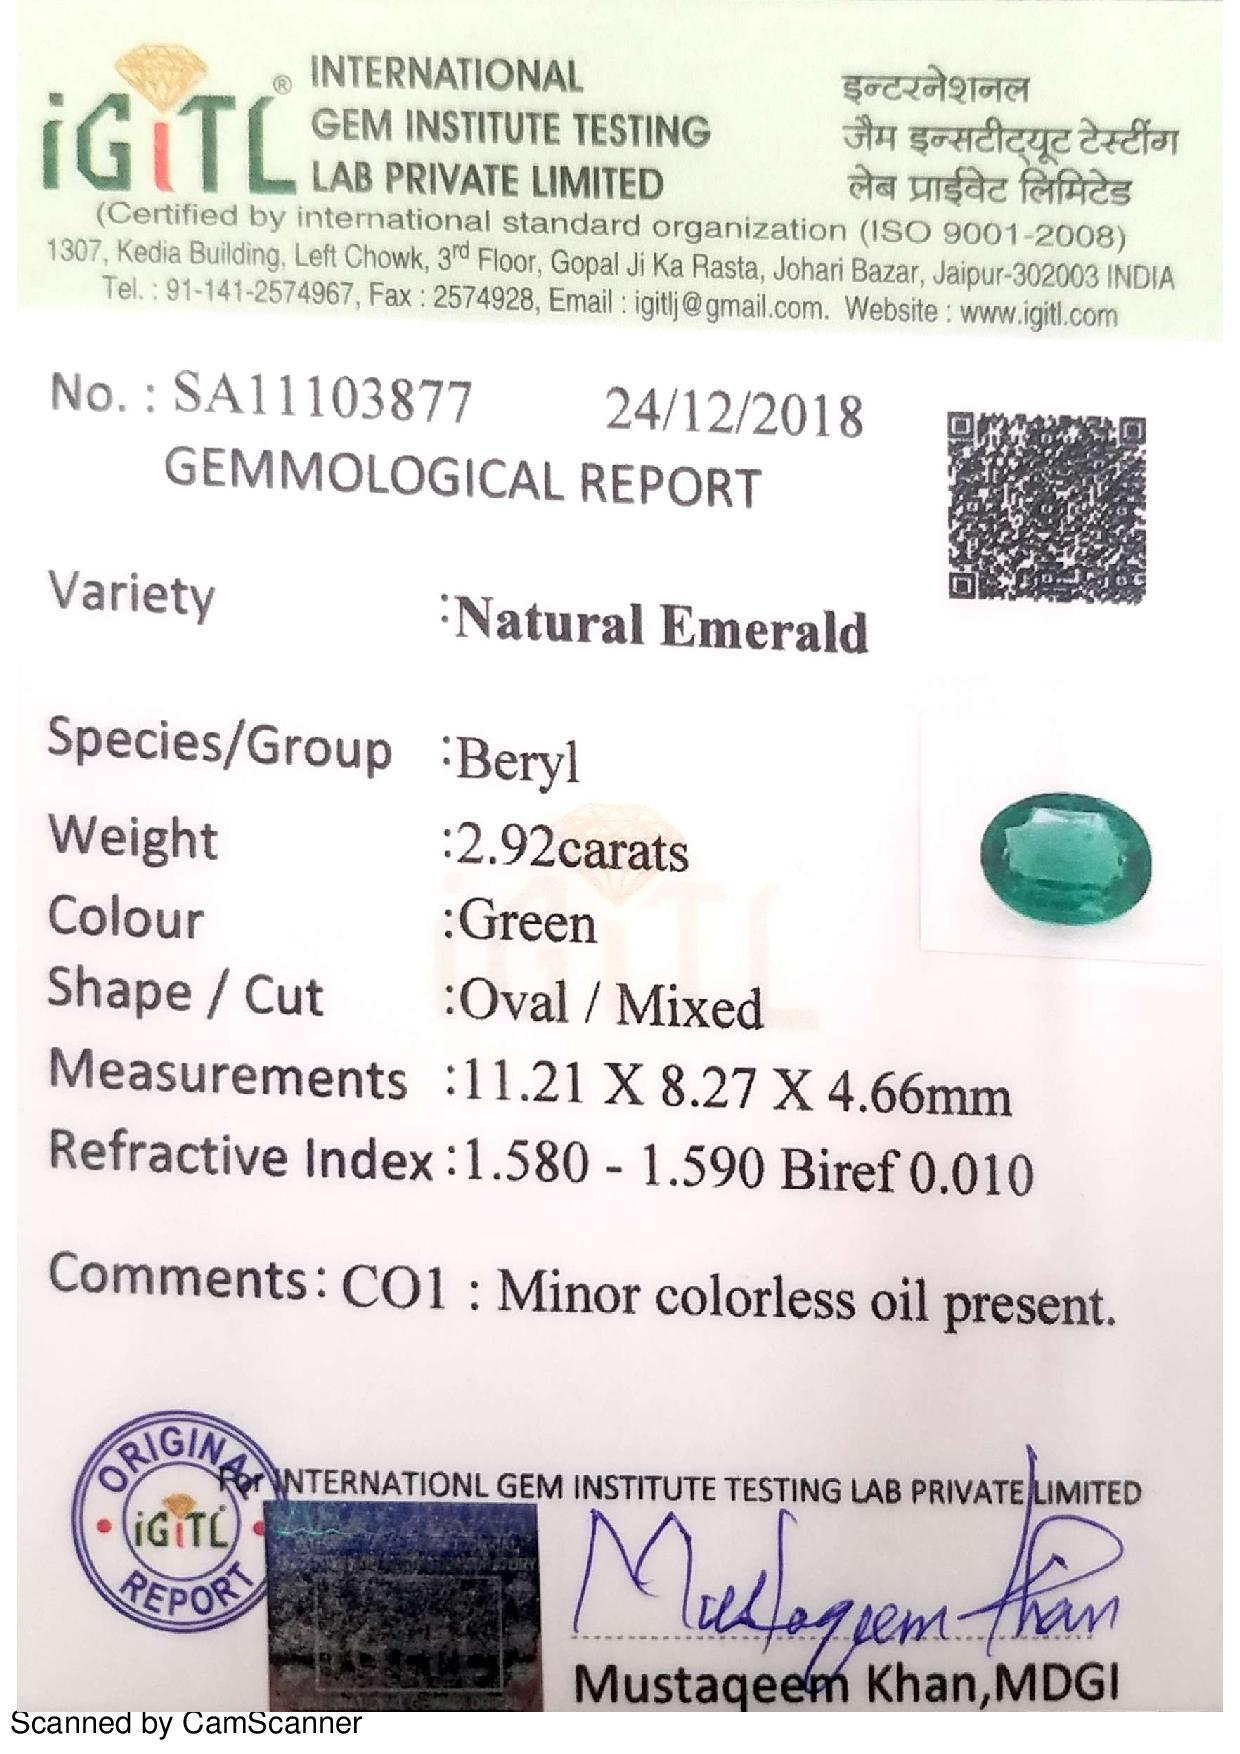 Oval Cut 2.92 Ct Weight Oval Shaped Green Color IGITL Certified Emerald Gemstone Pendant For Sale